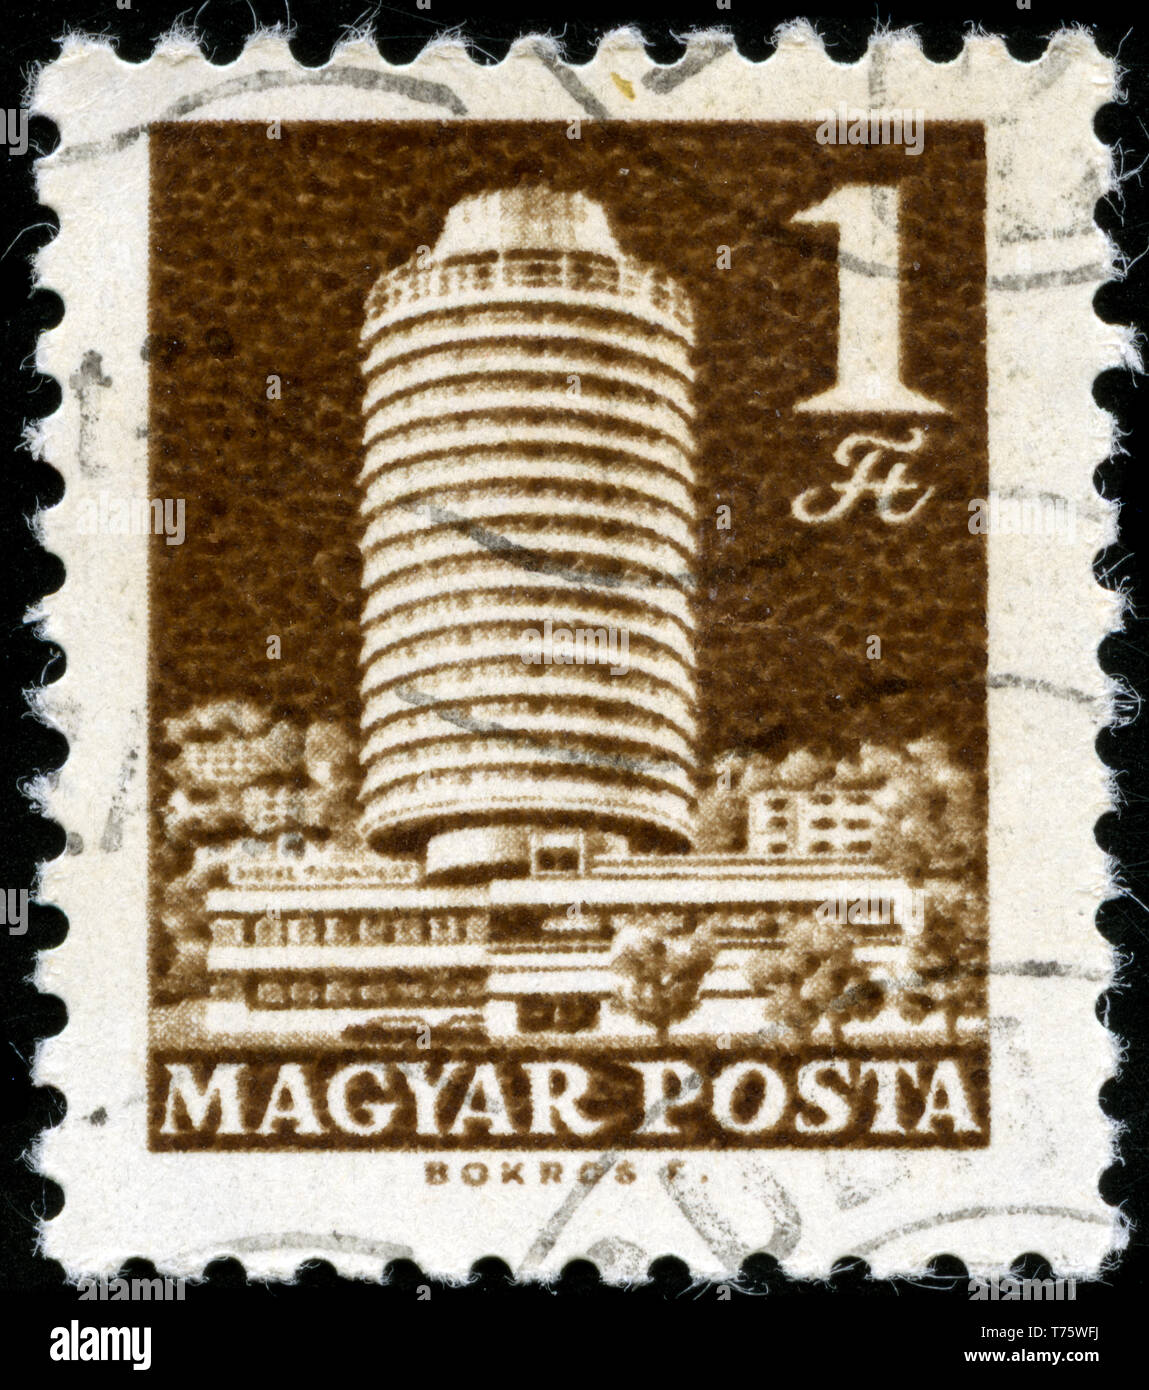 Postage stamp from Hungary in the Transport and Telecommunication series issued in Stock Photo